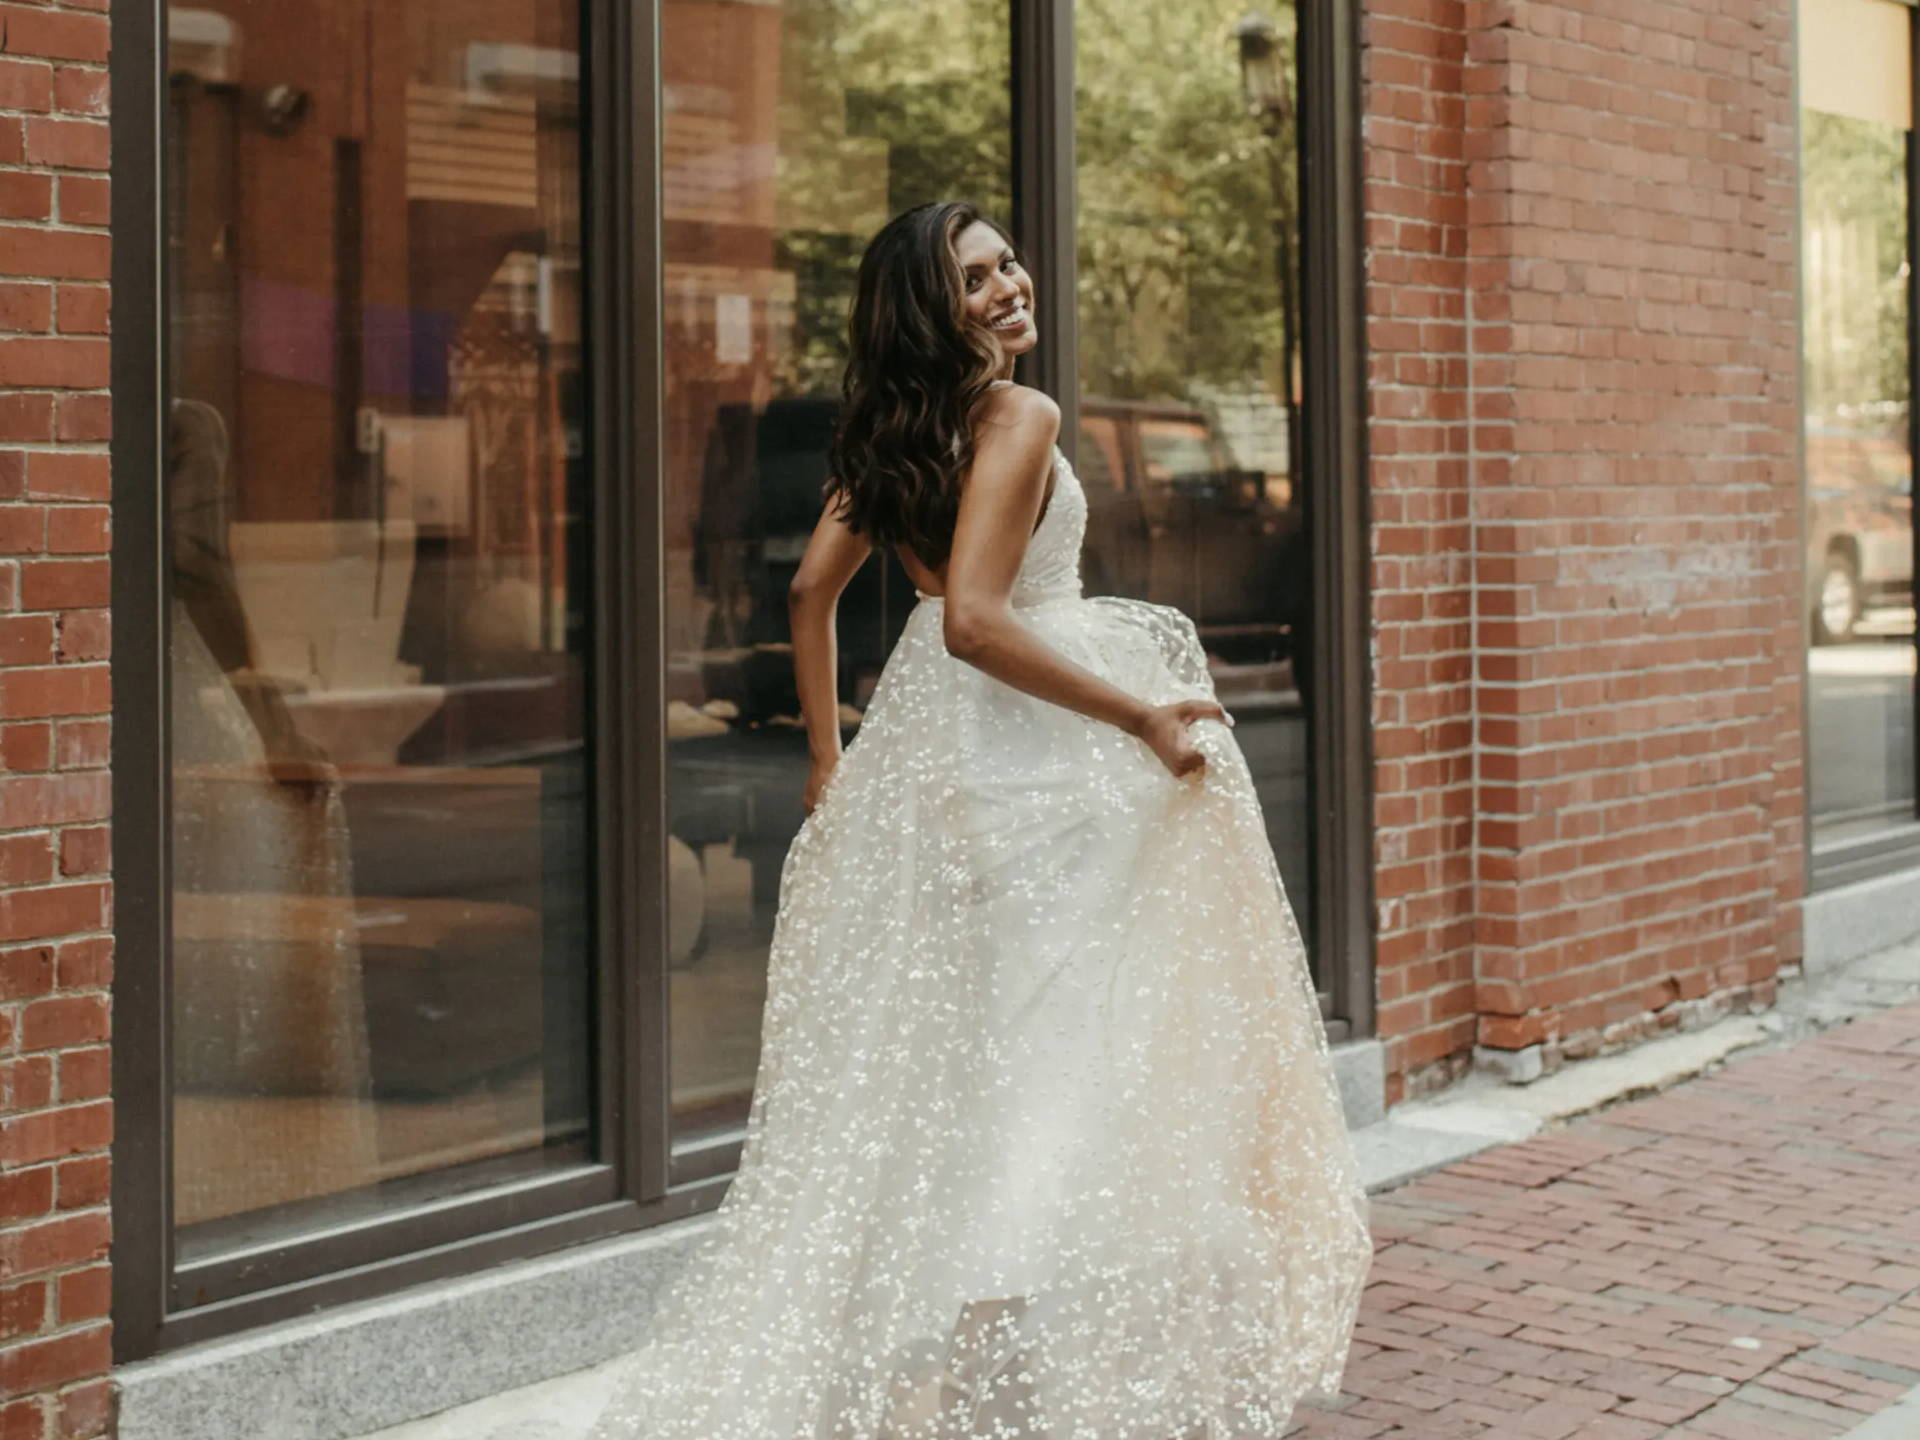 Bride wearing a sparkly Grace Loves Lace wedding dress outside brick building